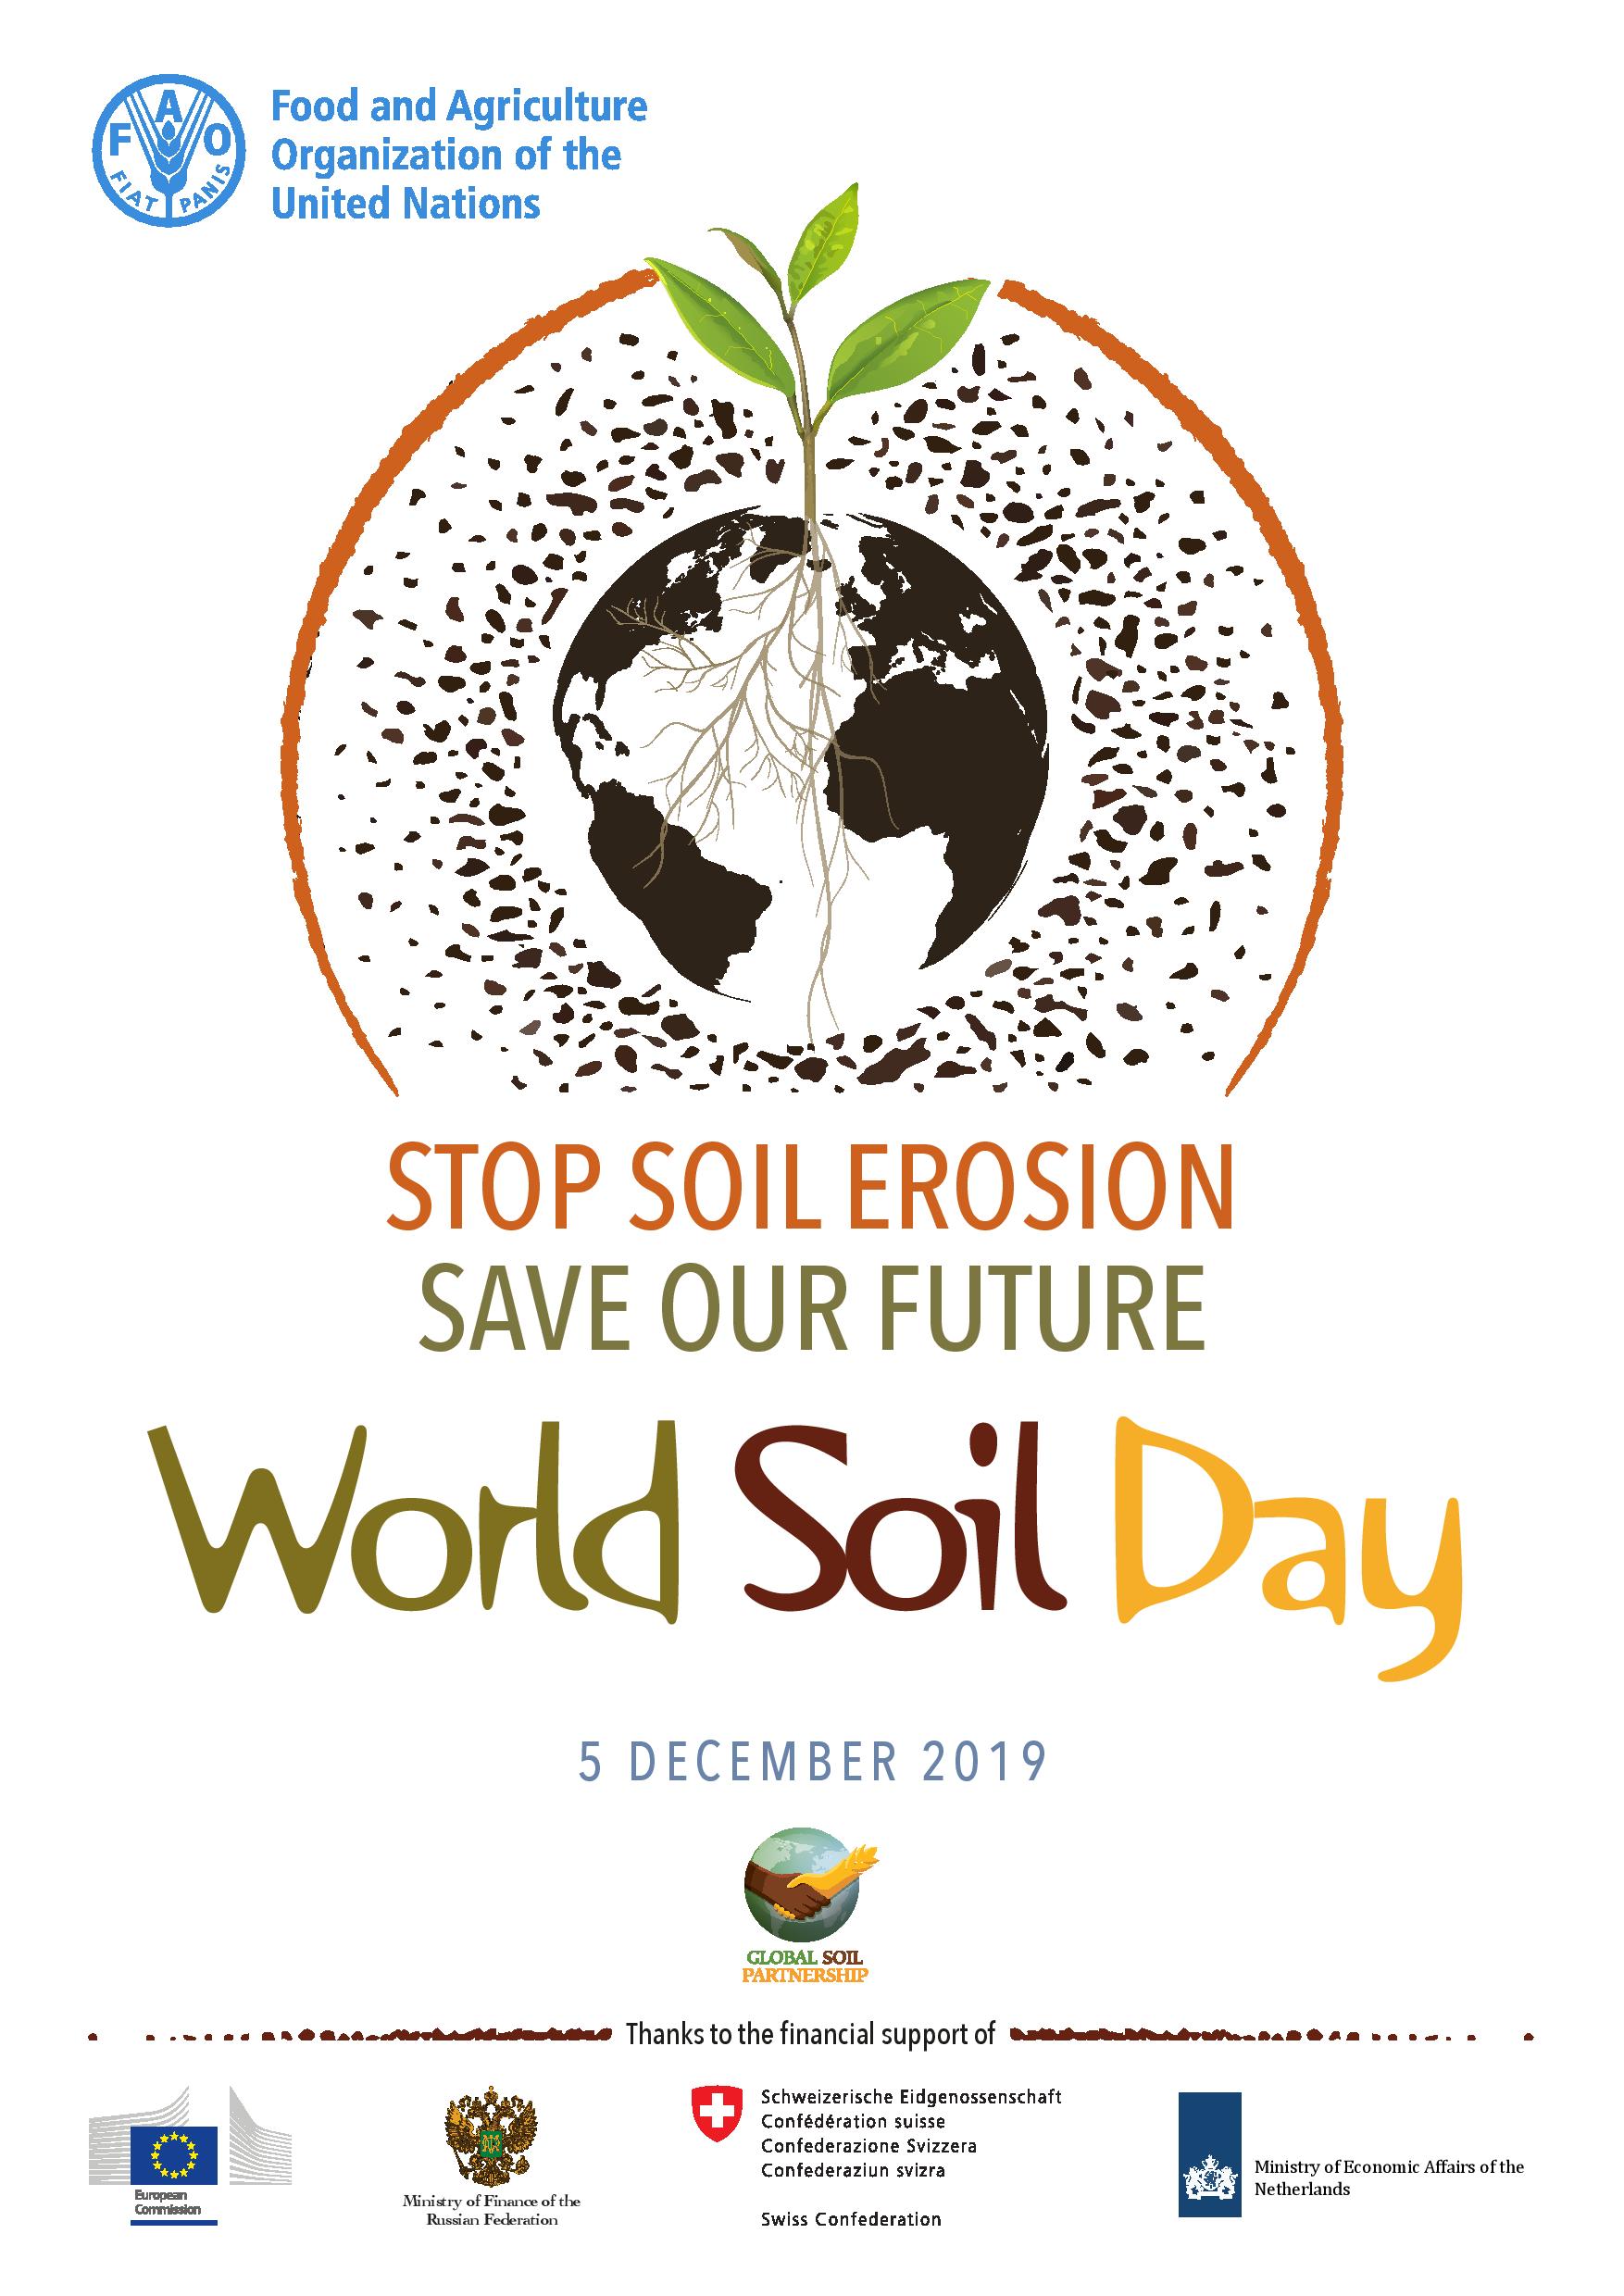 USeP supports World Soil Day